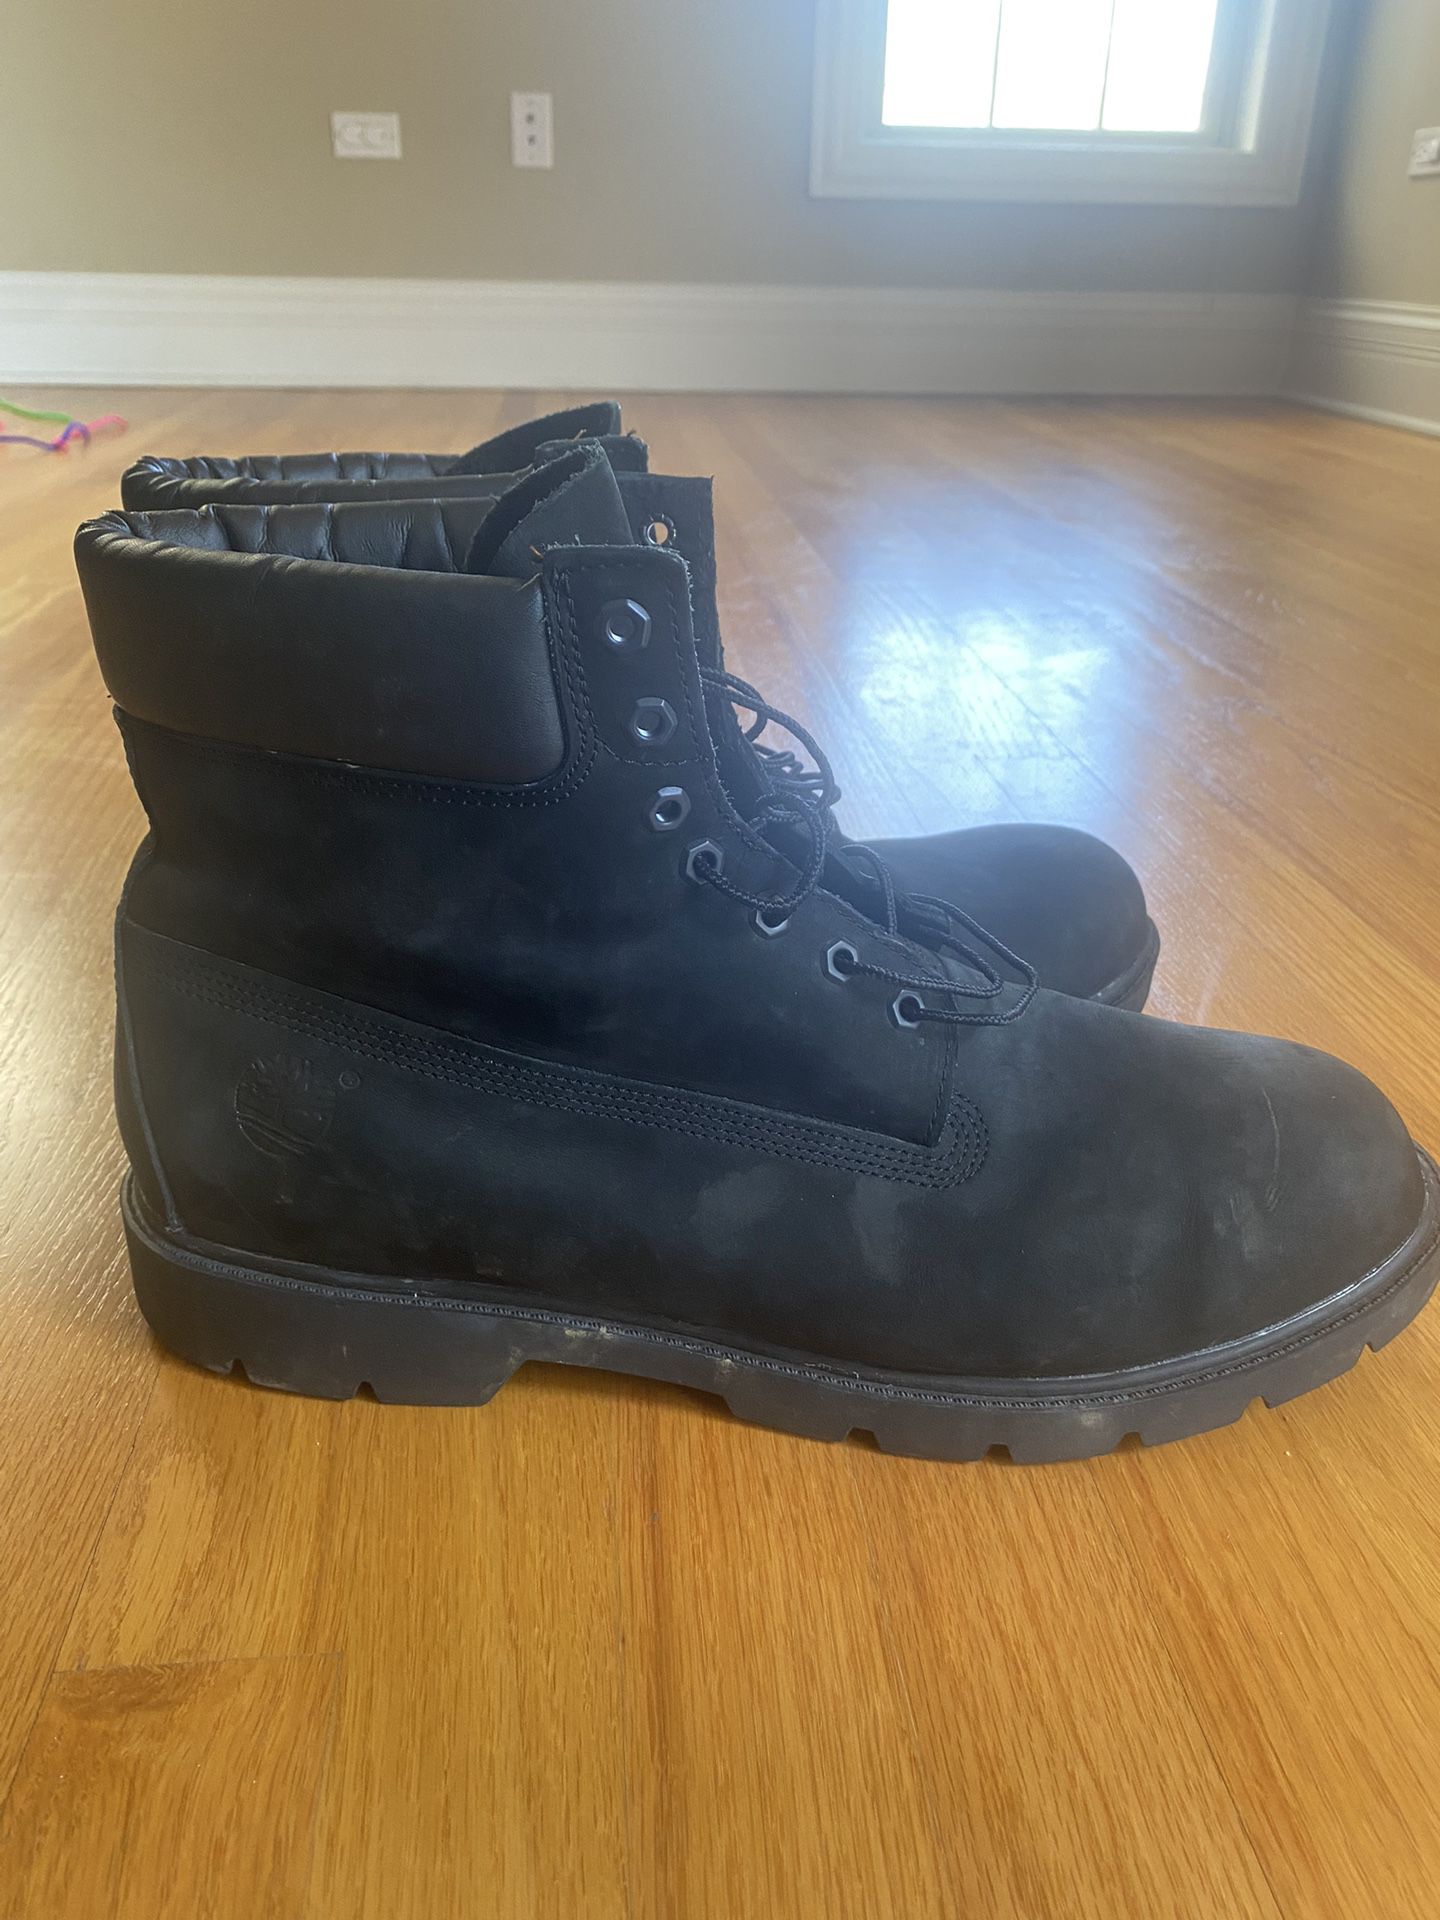 Timberland Boots Black Size 15 Adult Shoes Fast Shipping EUC laced Steel Toe